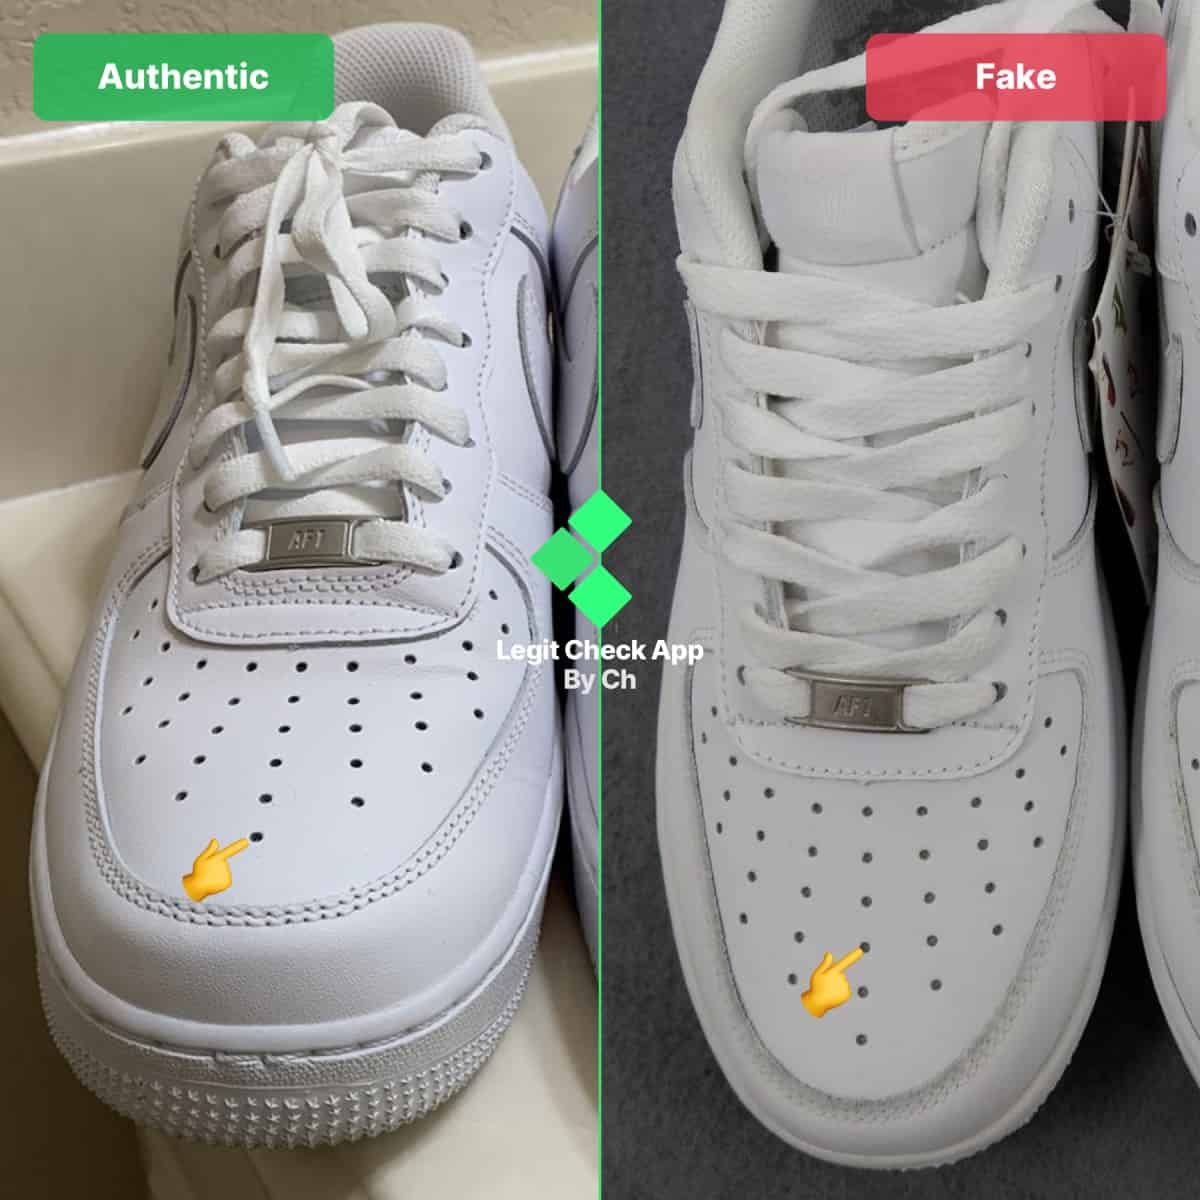 How You Can Spot Fake Nike Air Force 1 In 2021 - The Ultimate Fake vs Real  AF1 Guide - Legit Check By Ch